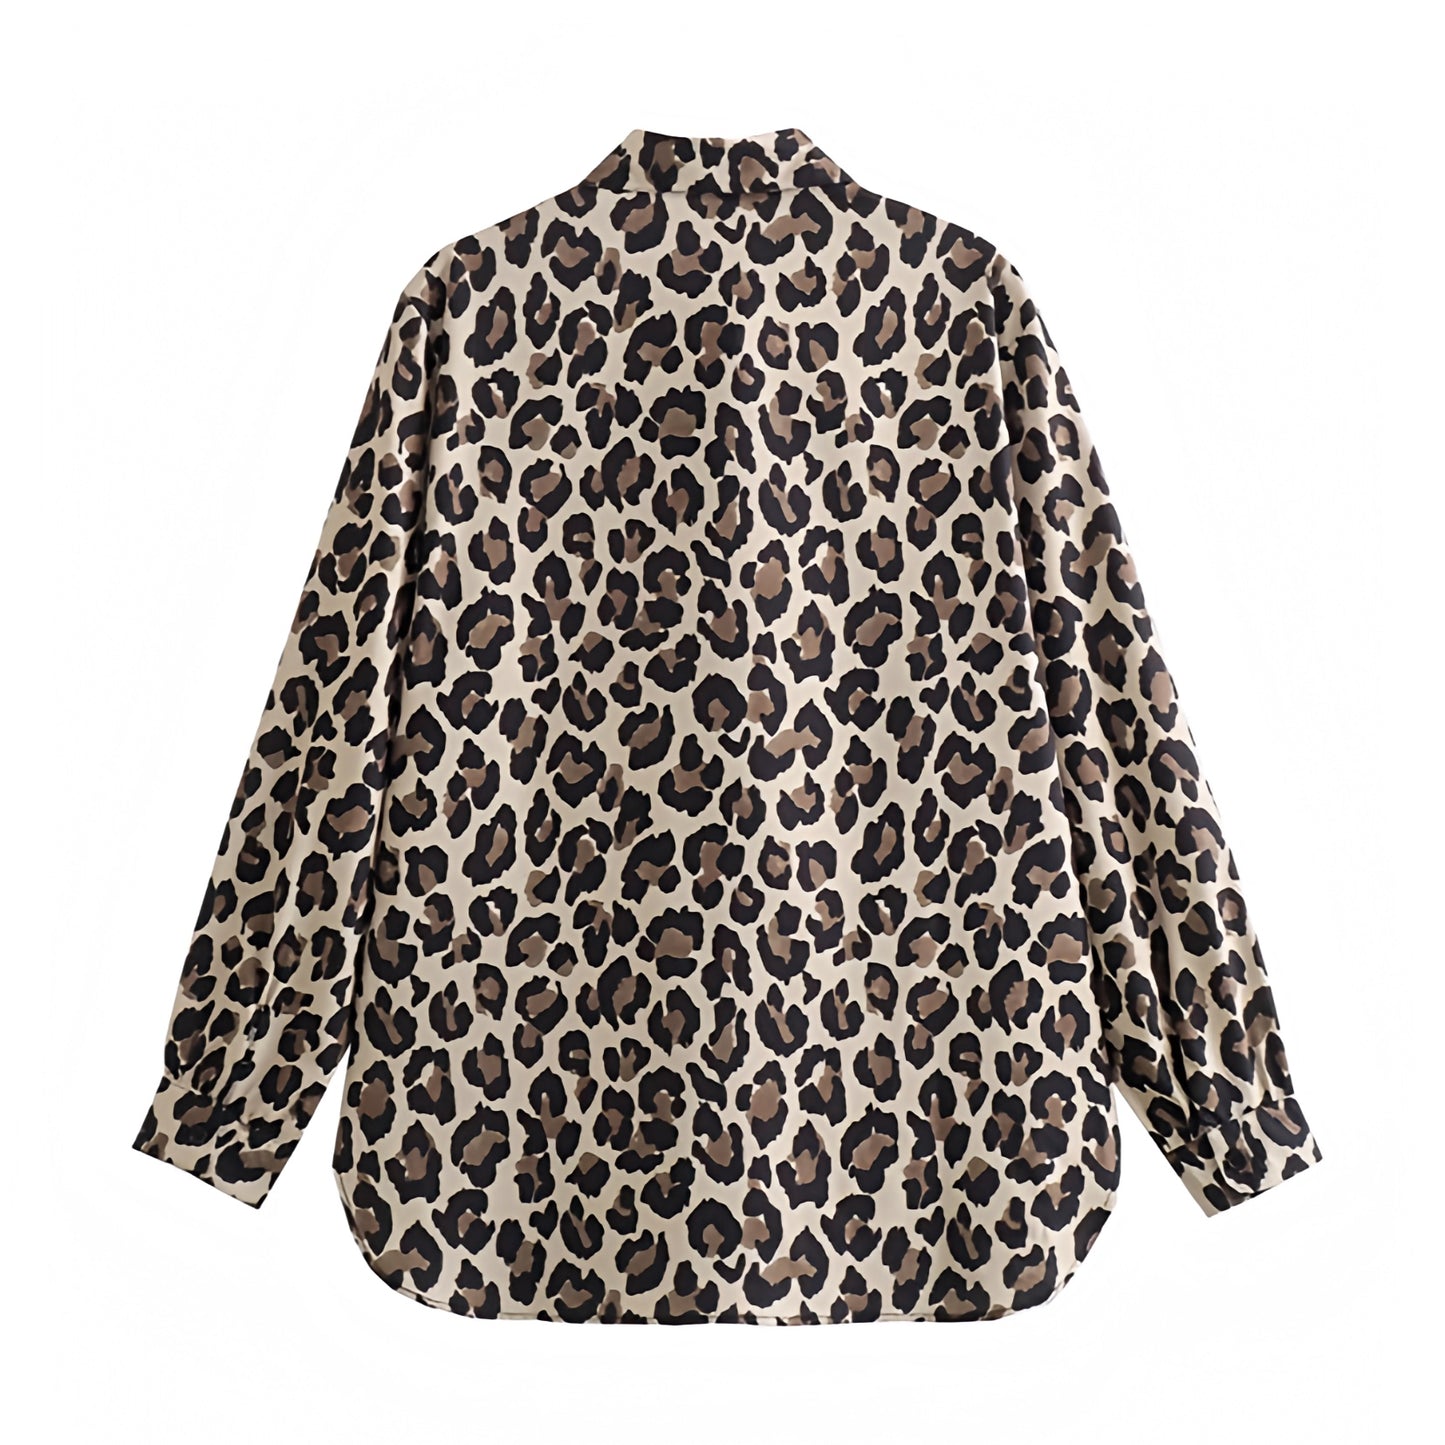 leopard-cheetah-animal-print-patterned-brown-black-multi-color-button-down-long-sleeve-collared-v-neckline-full-length-cotton-linen-light-weight-blouse-shirt-top-vintage-retro-women-ladies-teens-tweens-chic-trendy-spring-2024-summer-casual-feminine-y2k-club-wear-sexy-party-night-out-2000s-office-siren-stockholm-style-zara-aritzia-revolve-reformation-dupe